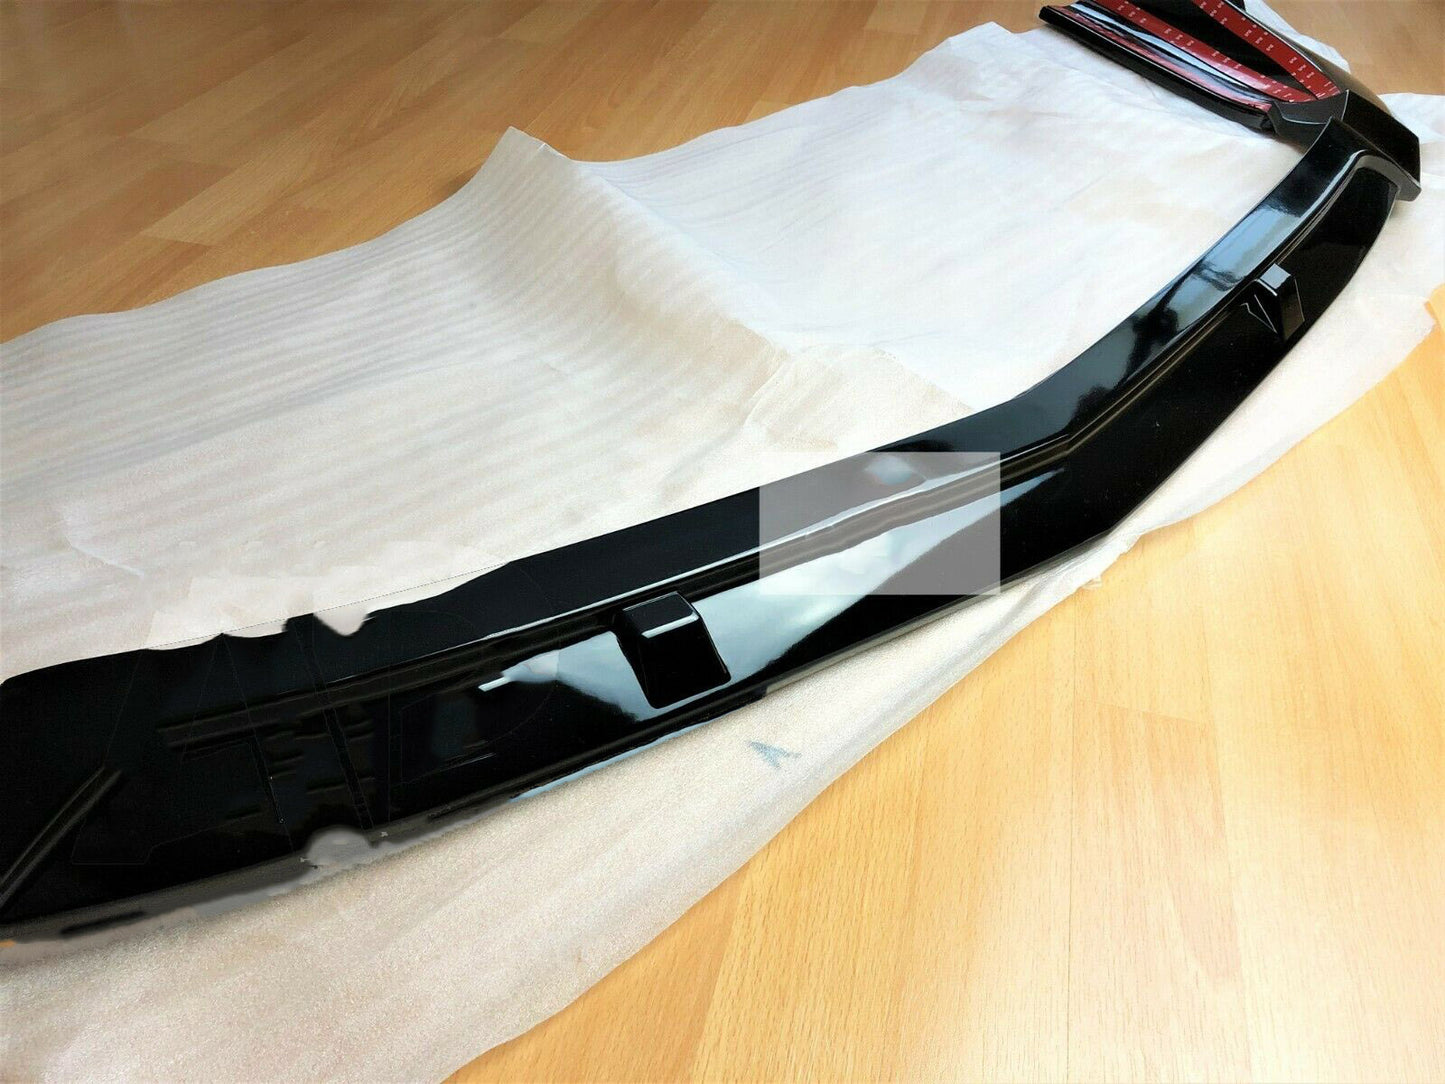 Mercedes A35 A45 AMG Brabus Style A Class W177 V177 Front Splitter Spoiler Lip